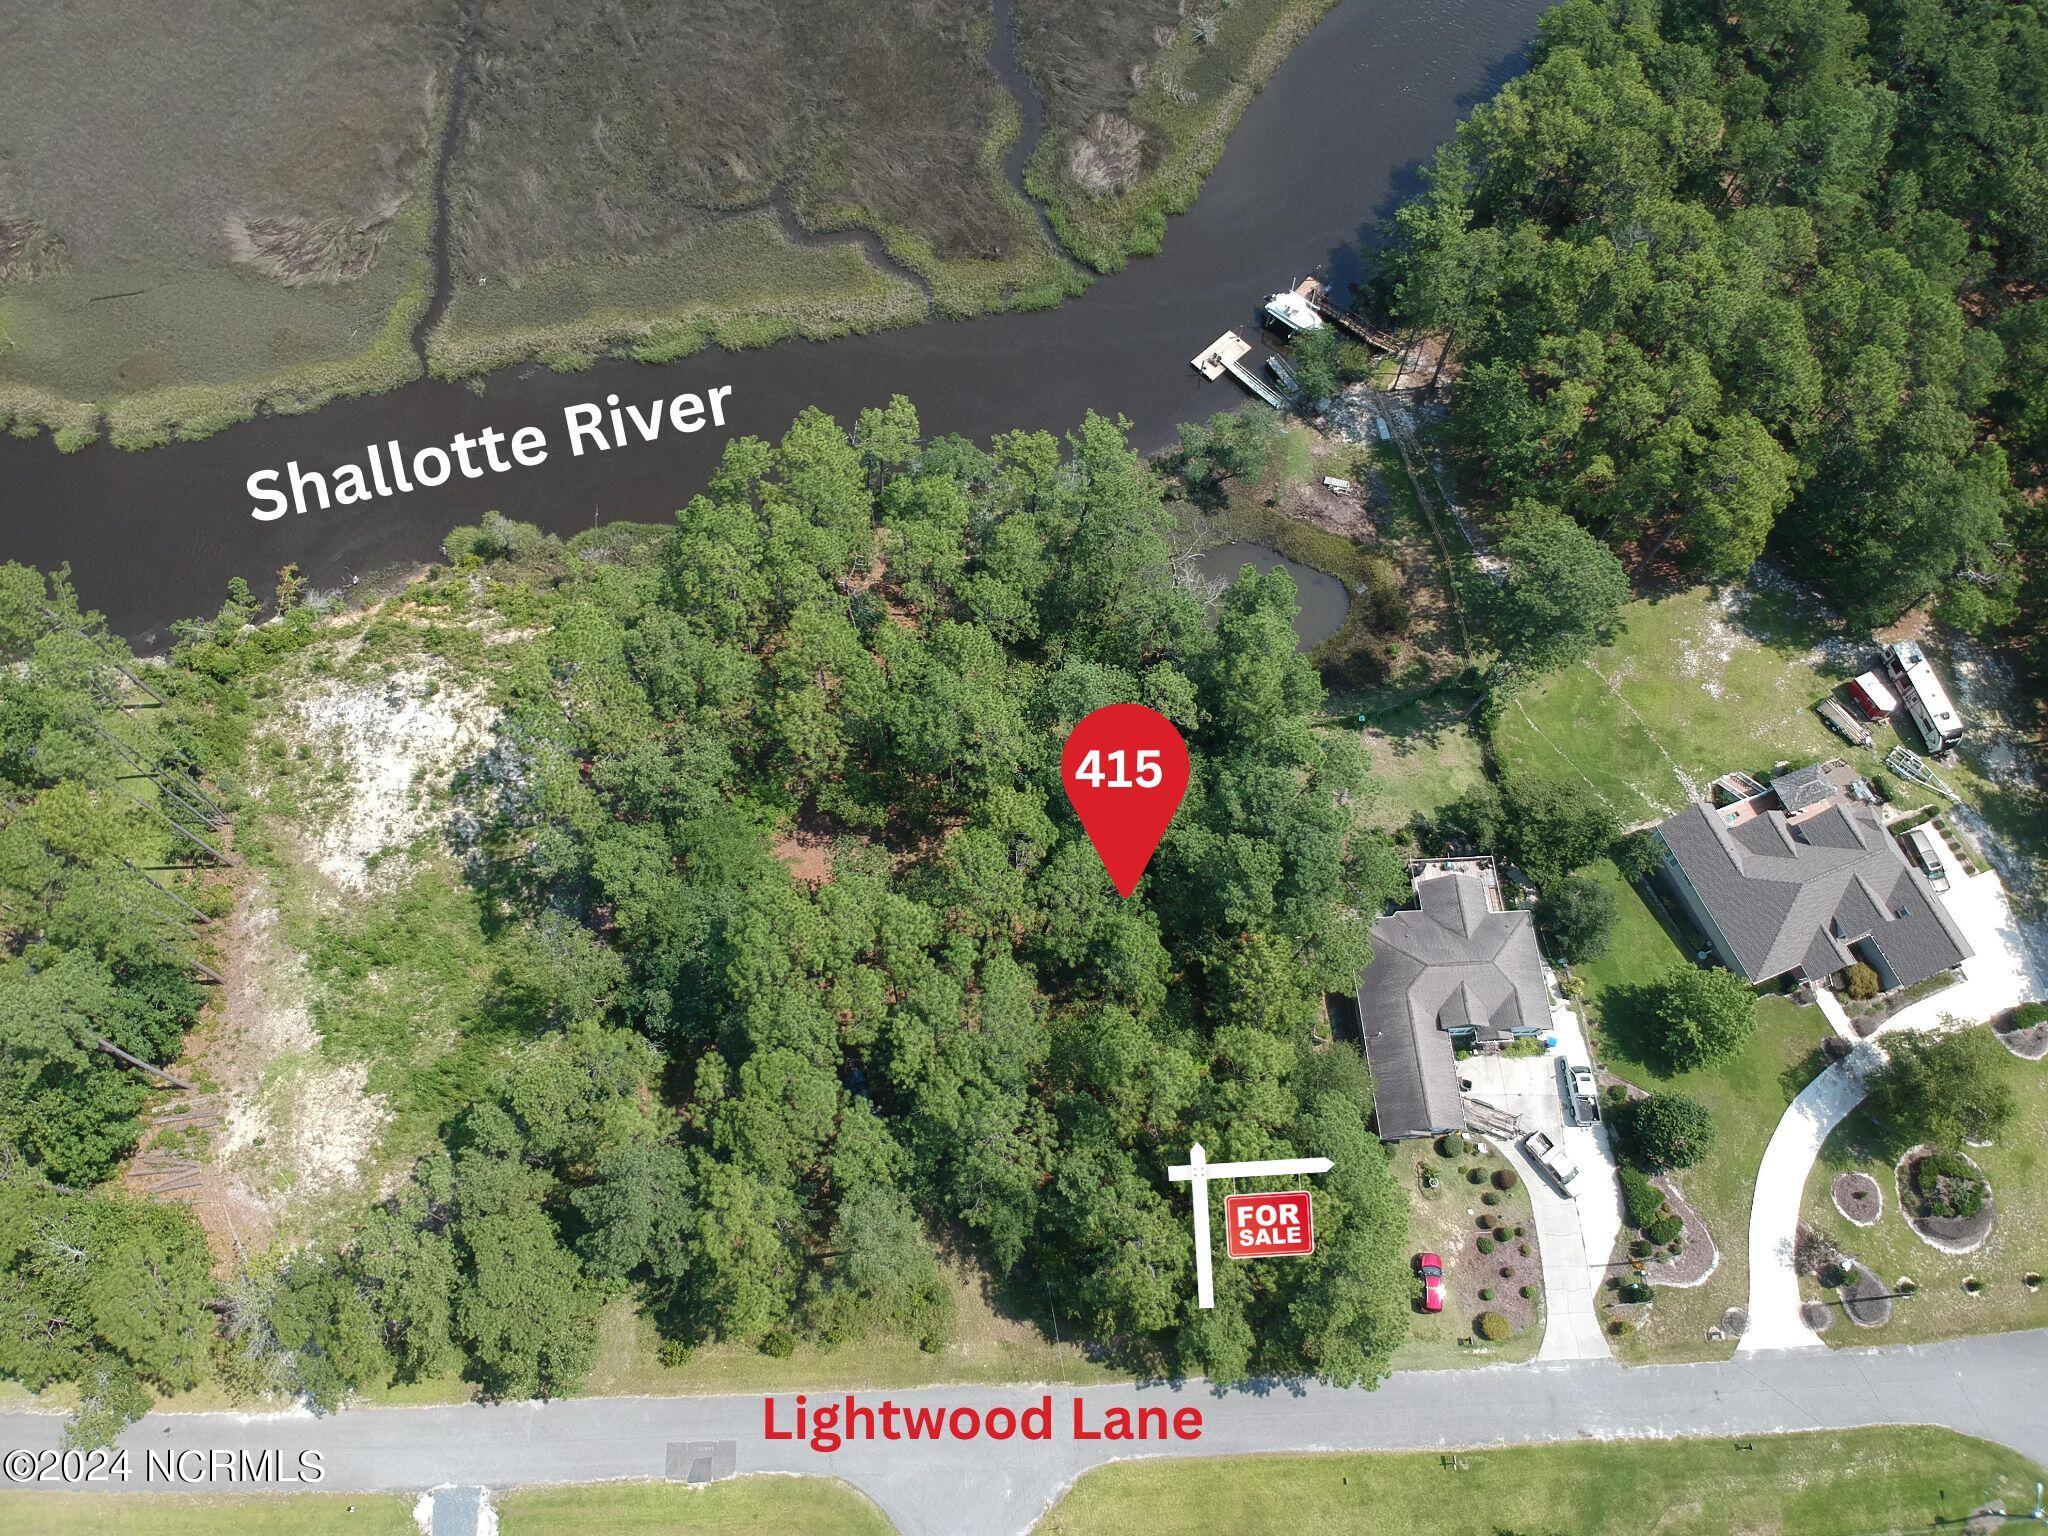 Overhead of lot and river